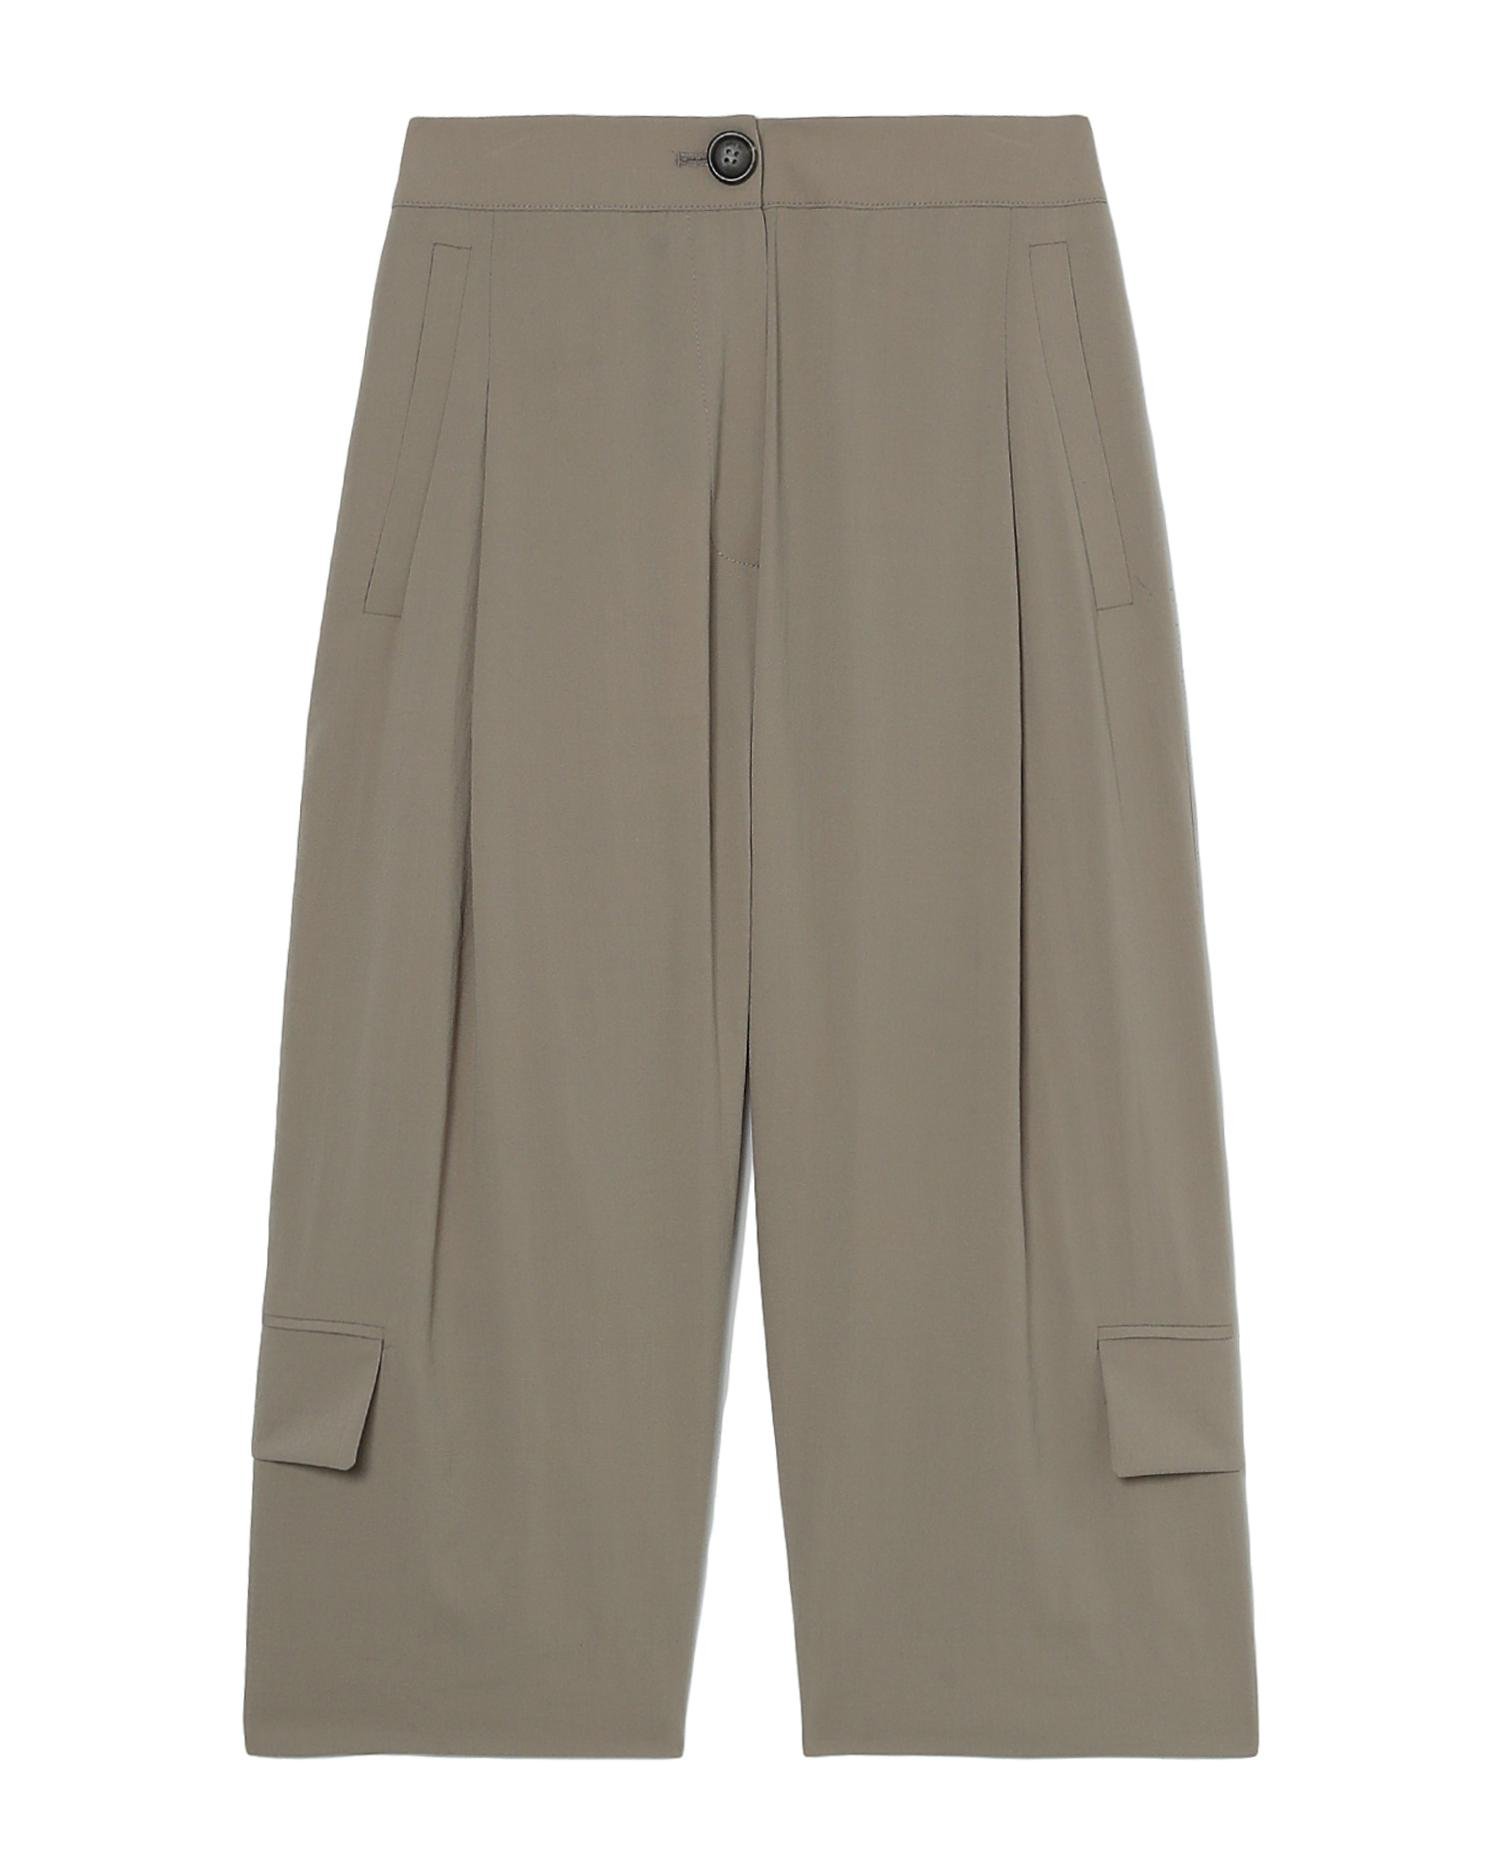 Relaxed cropped pants by D'DEMOO